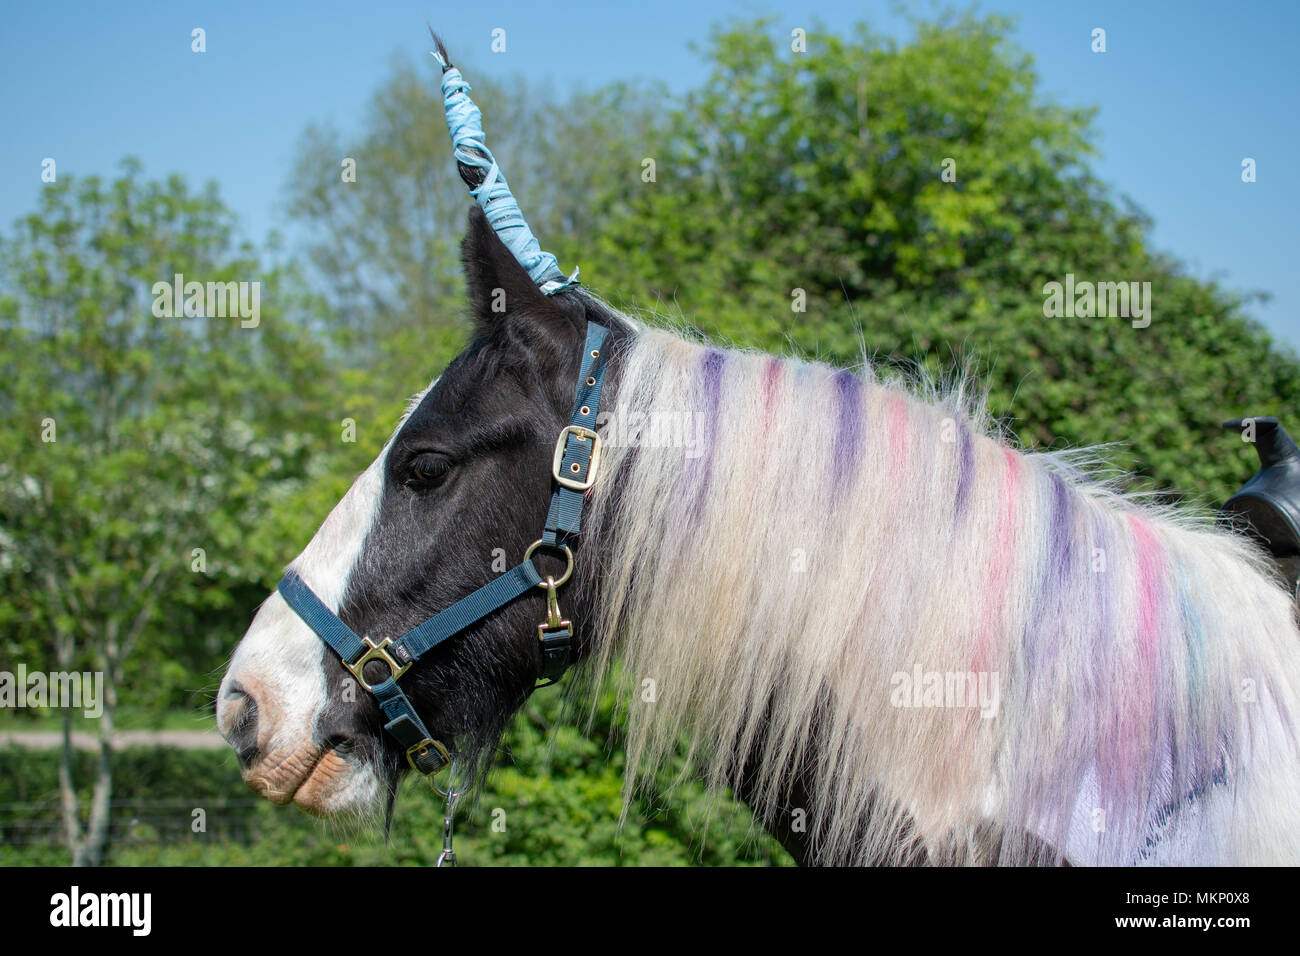 Horse dressed up as unicorn. Irish cob pony with horn and coloured mane, head in profile Stock Photo